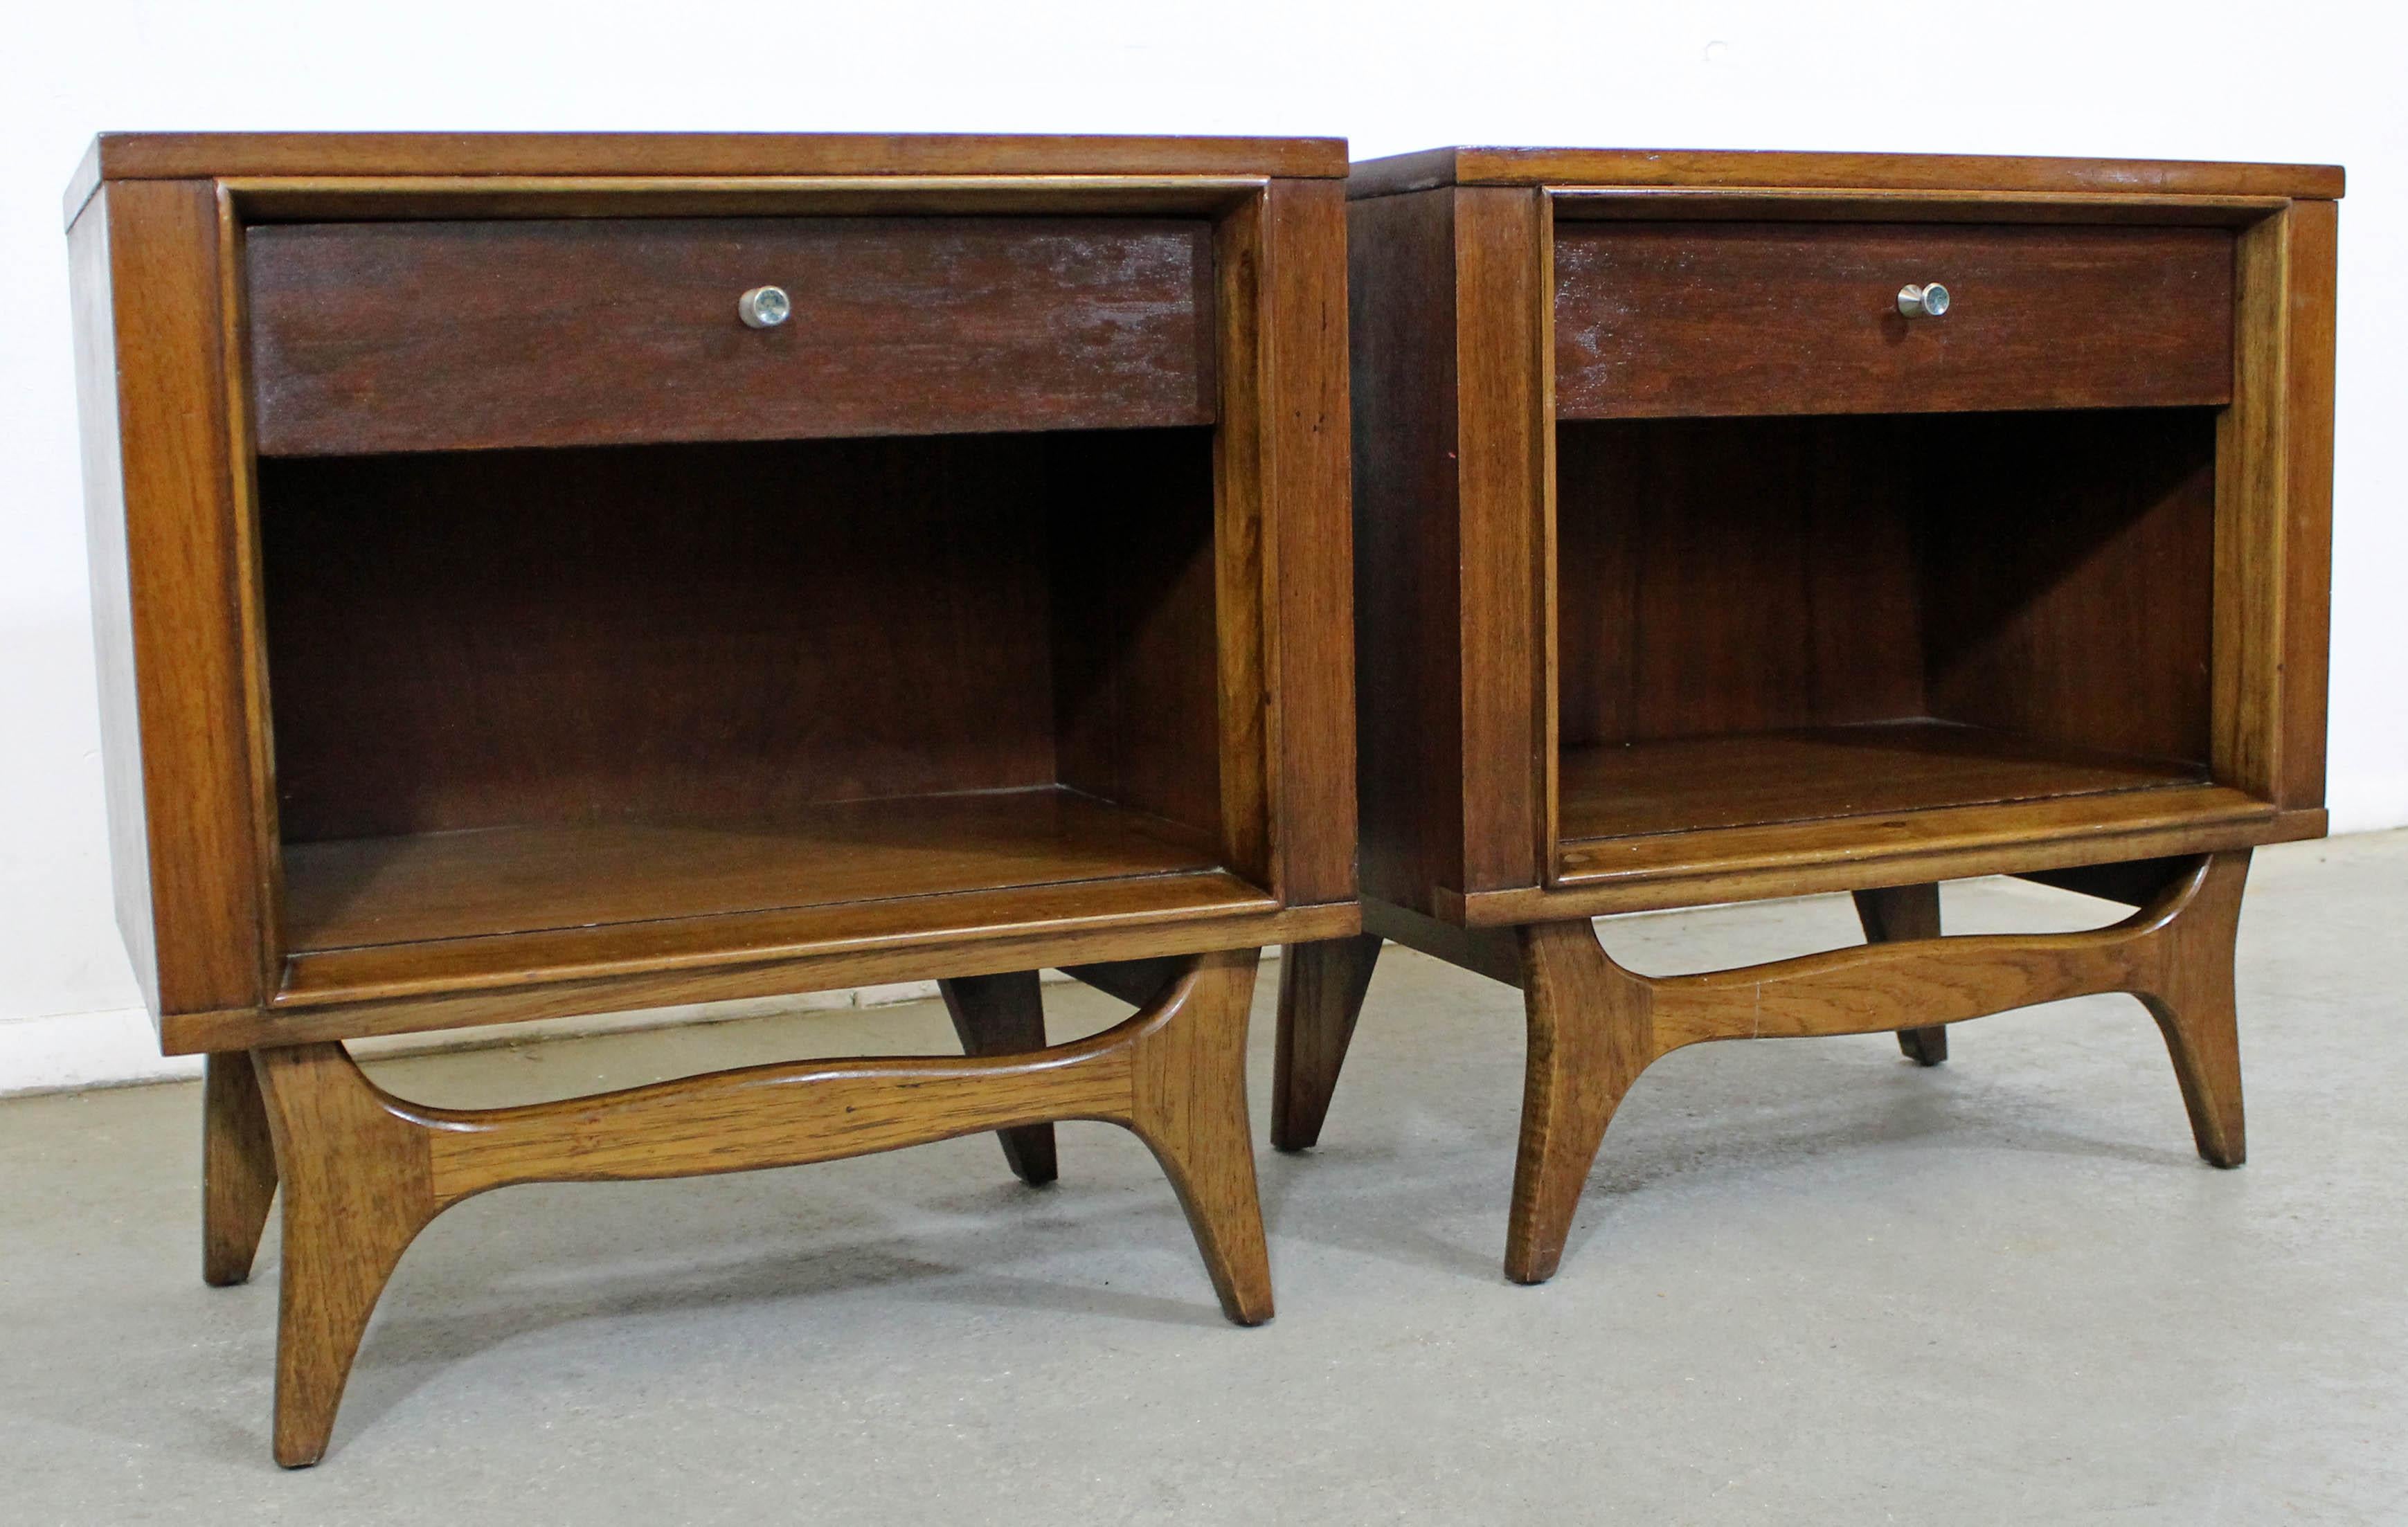 Offered is a pair of Mid-Century Modern nightstands by Kent Coffey's 'Insignia' line. This set is made of walnut, with each featuring one dove-tailed drawer and open storage cabinet. They are in good condition, with refinished tops and sides and